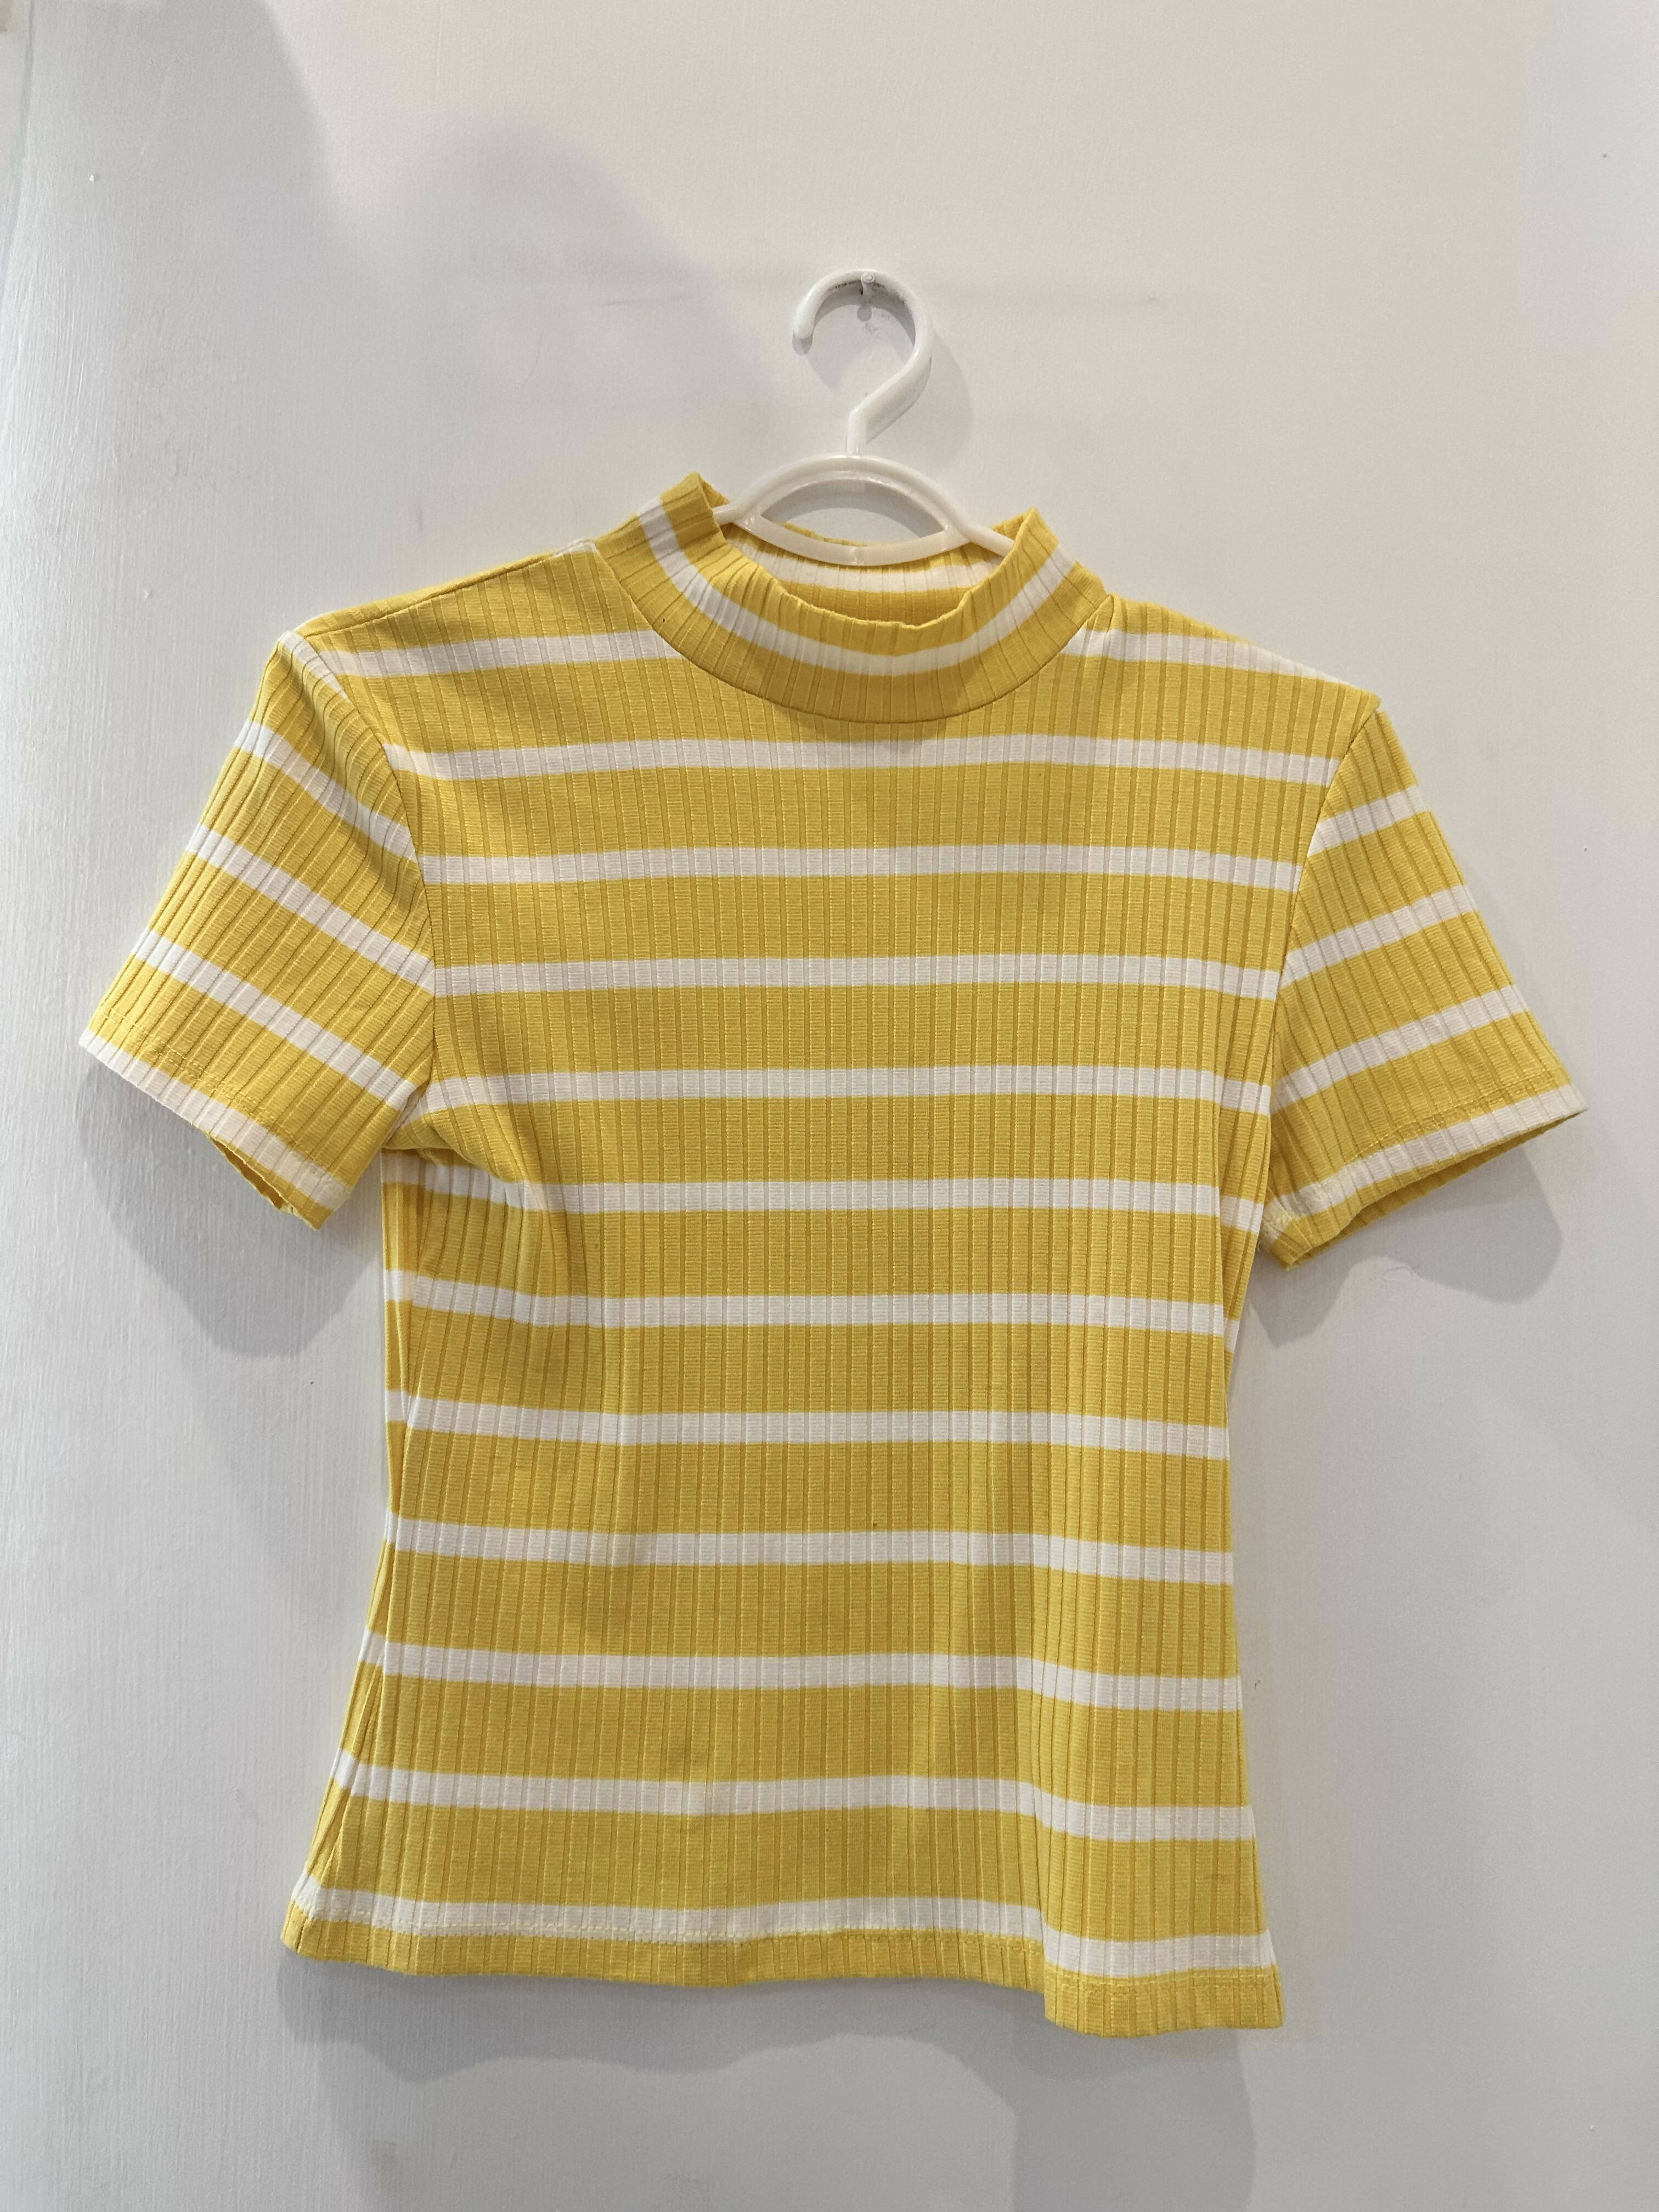 Topshop | Petite UK | Yellow Top | Women Tops & Tshirts | Extra small | Worn Once